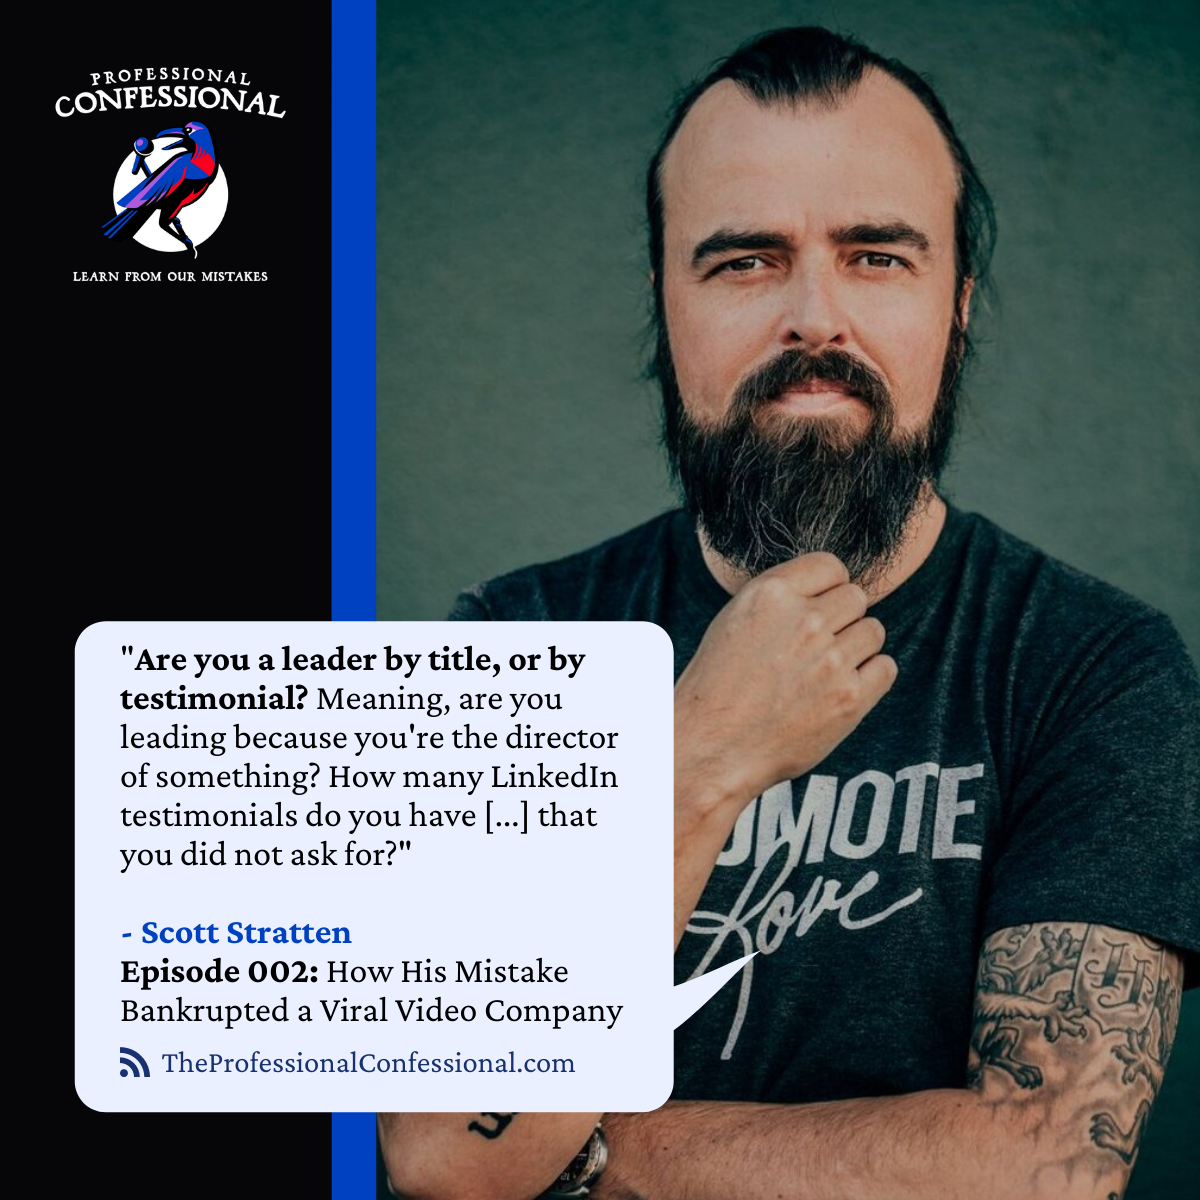 Scott Stratten on the Professional Confessional podcast, discussing leadership